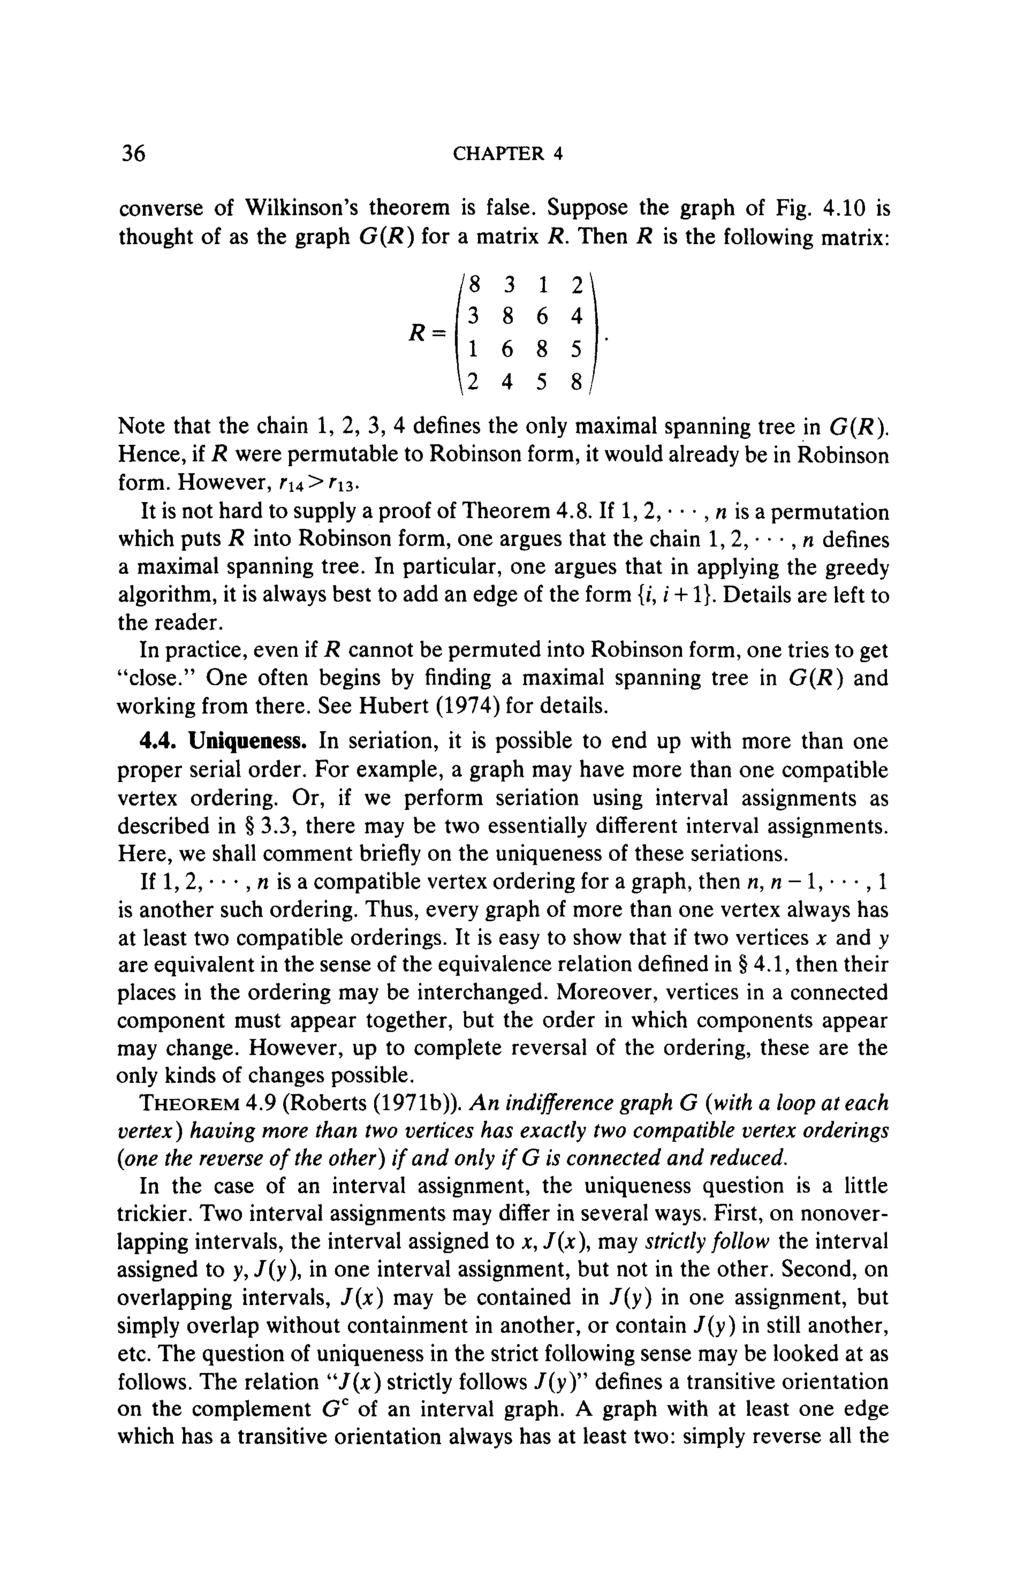 36 CHAPTER 4 converse of Wilkinson's theorem is false. Suppose the graph of Fig. 4.10 is thought of as the graph G(R) for a matrix R.